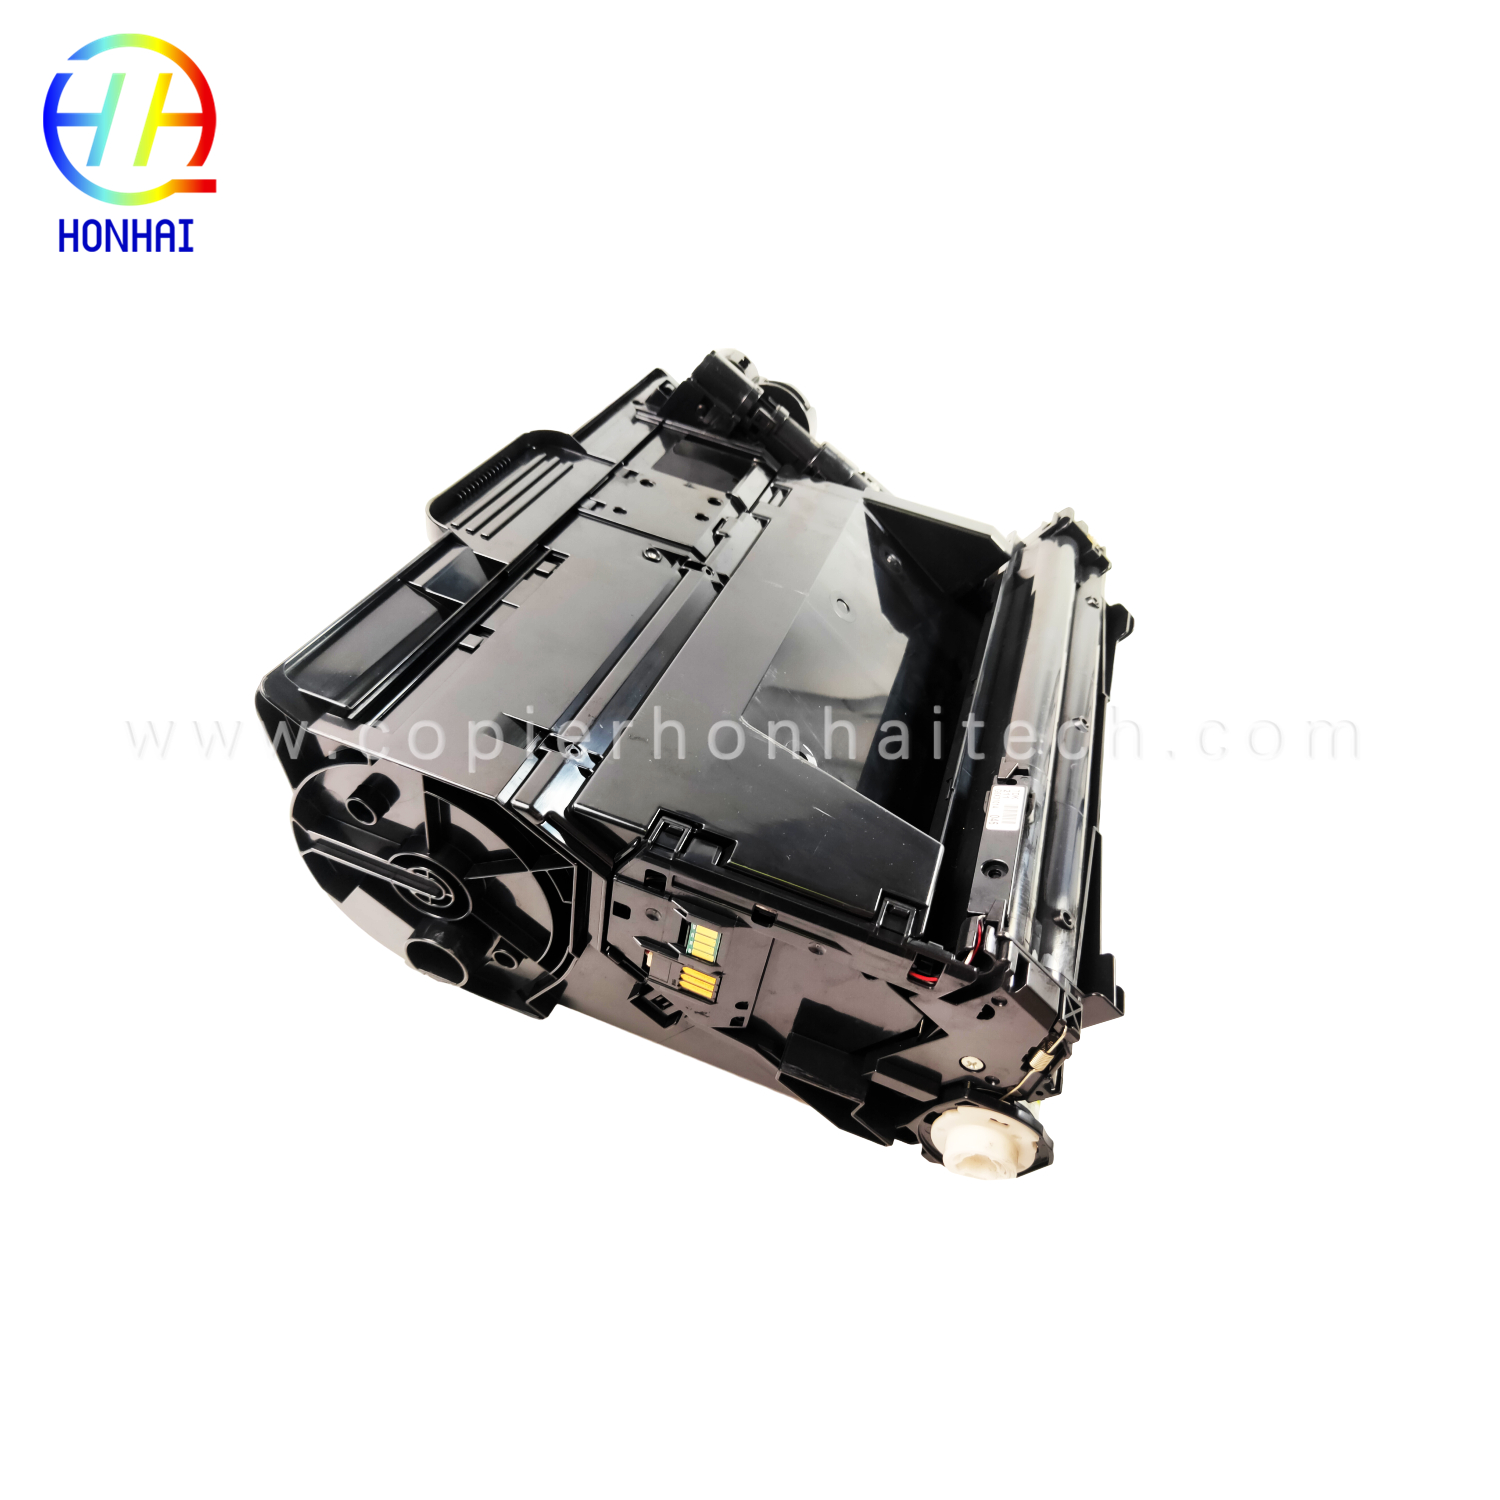 Drum Cartridge for Xerox Phaser 3610 WorkCentre 3615 3655 3655i 113R00773 113R773 Drum Unit